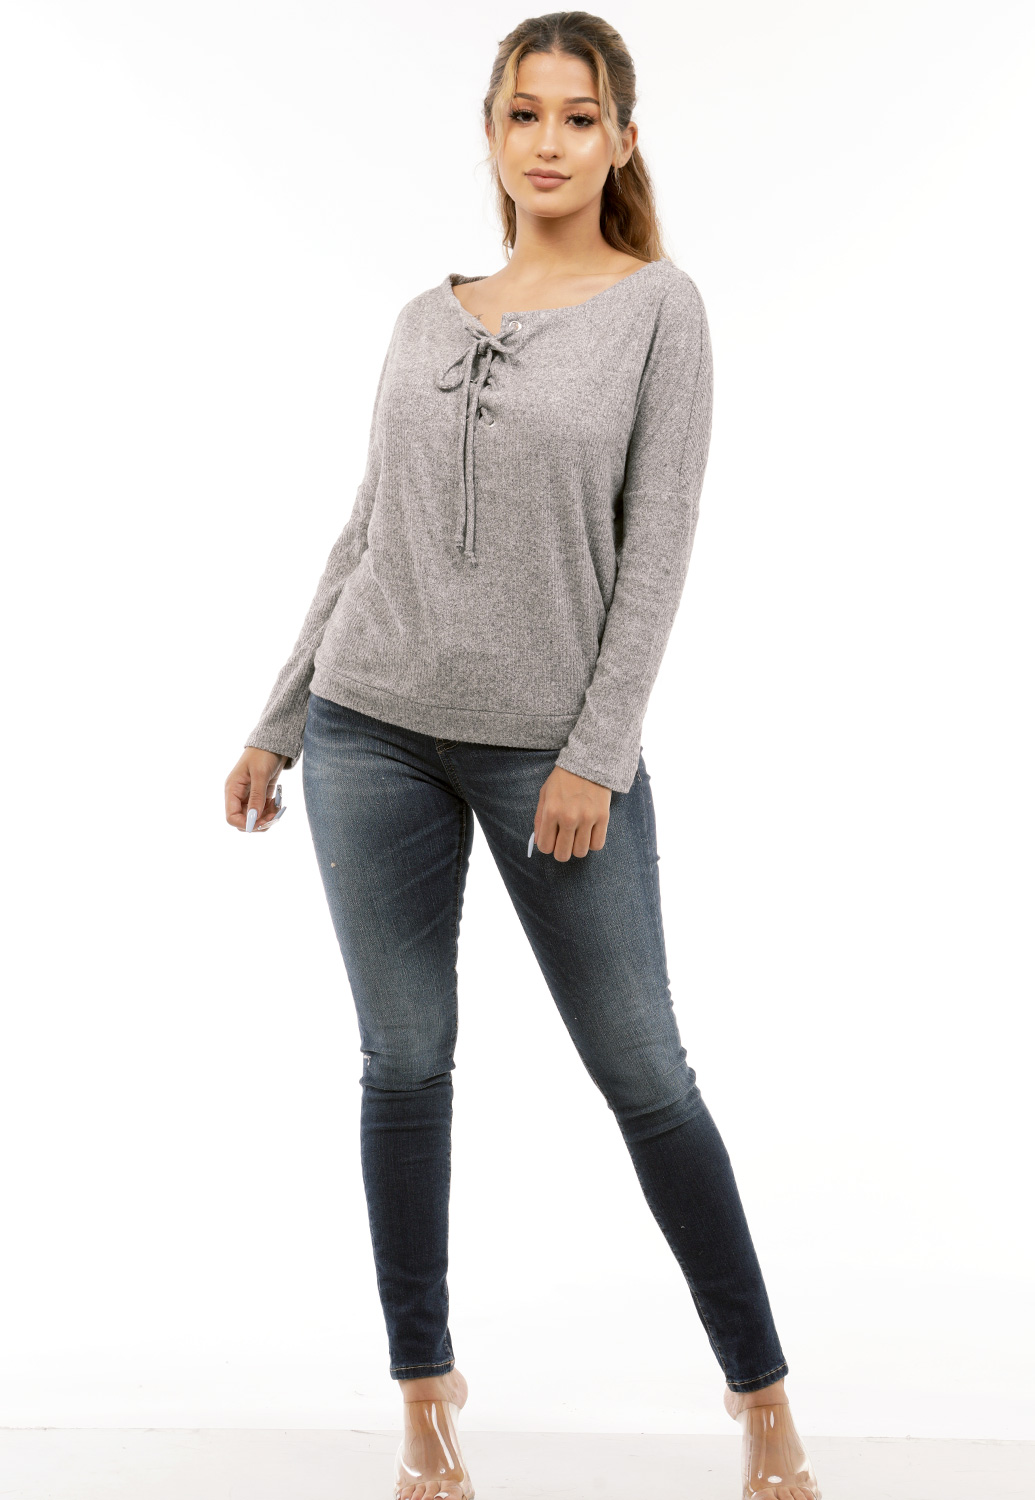 Lace Up Long Sleeve Knit Top